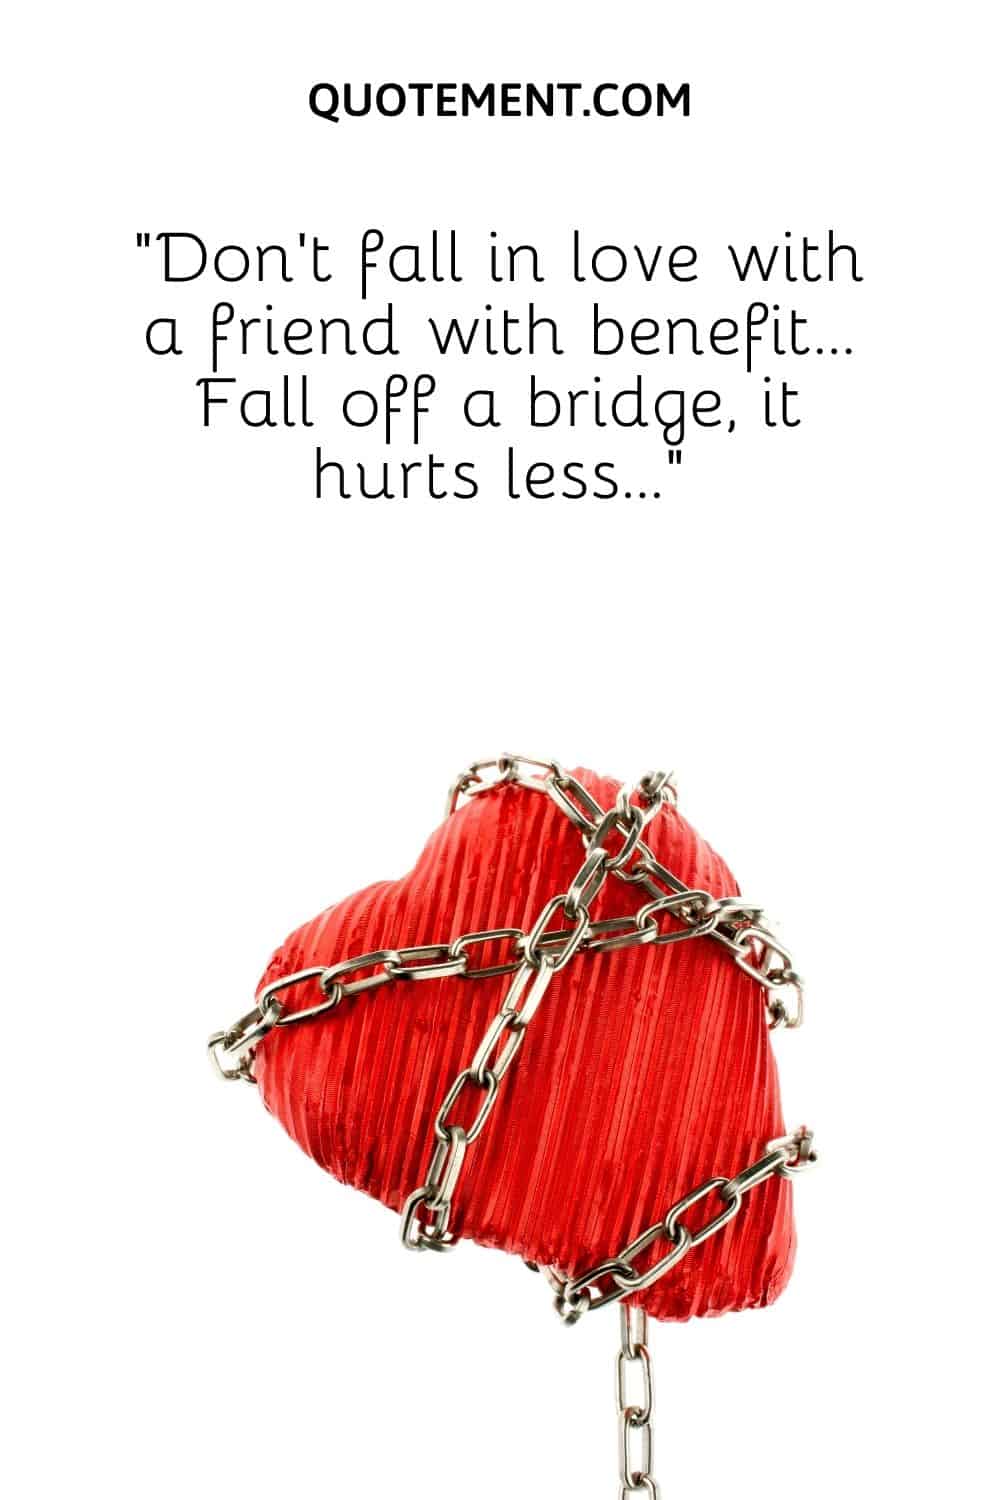 “Don’t fall in love with a friend with benefit… Fall off a bridge, it hurts less…”